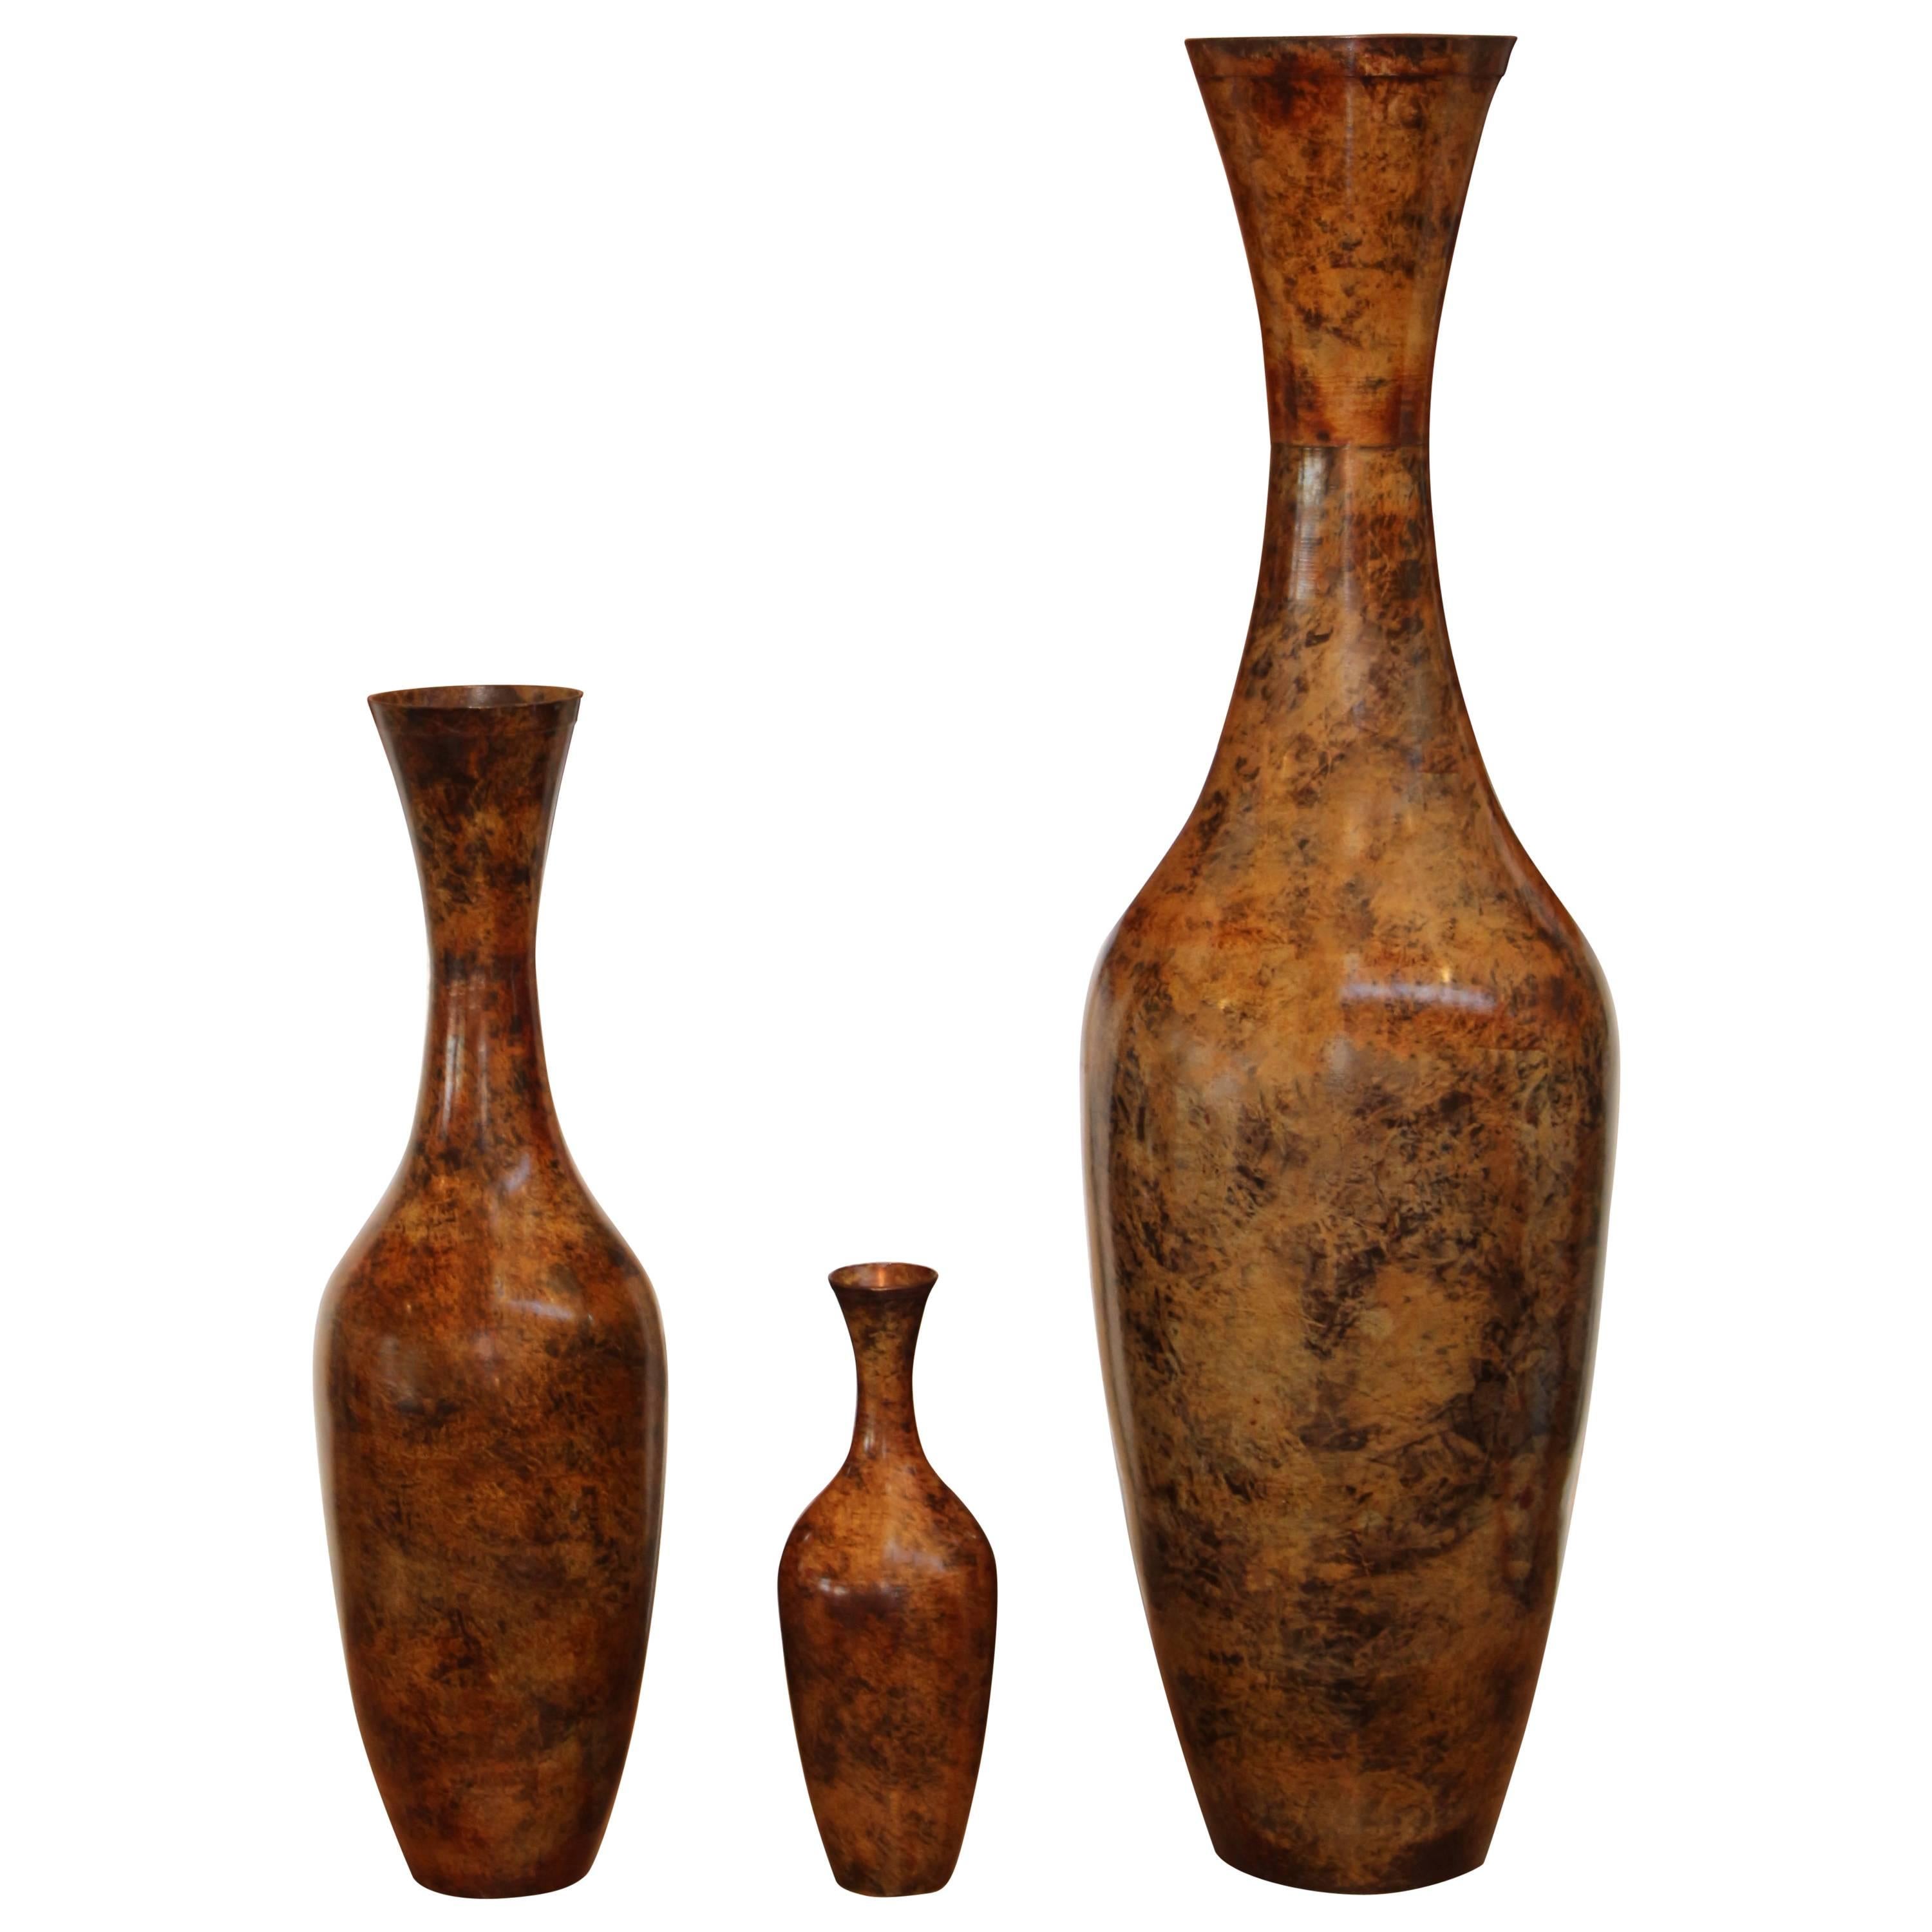 Three Graduated Bronze Vases Patinated with a Great Tortoise Patina